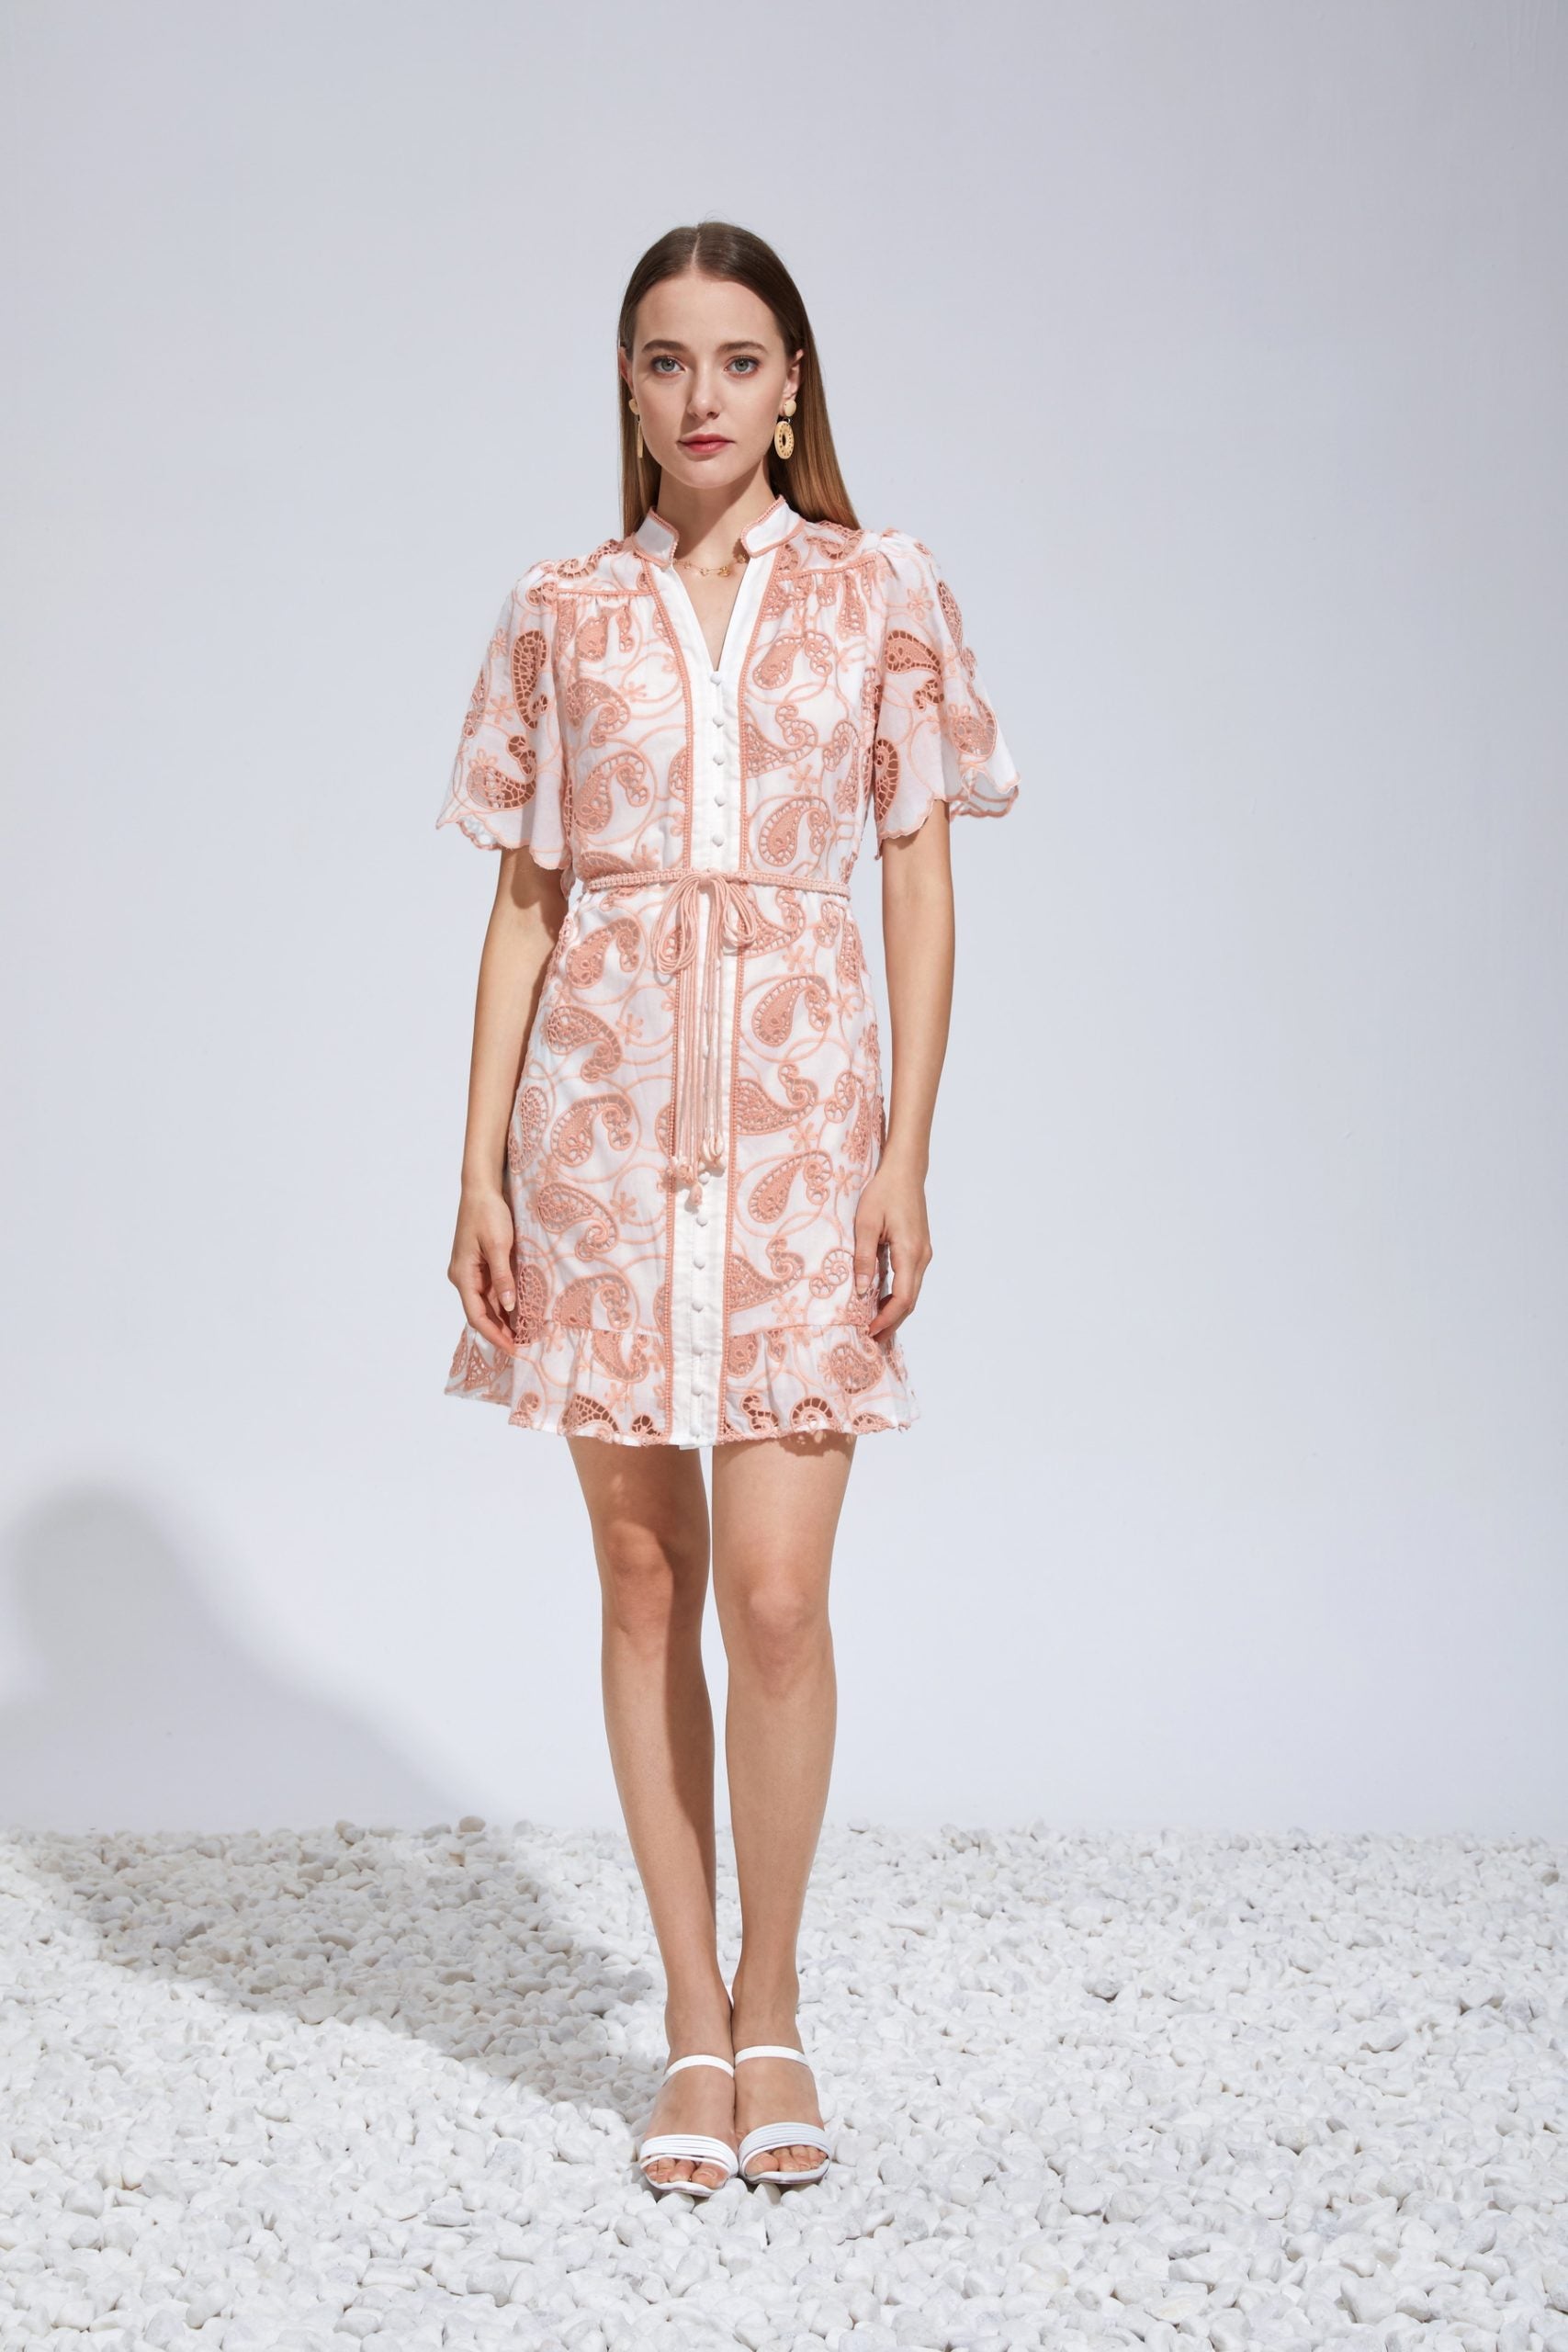 &quot;Turn heads with our floral embroidered short midi dress. Effortless elegance awaits. Buy now!&quot;